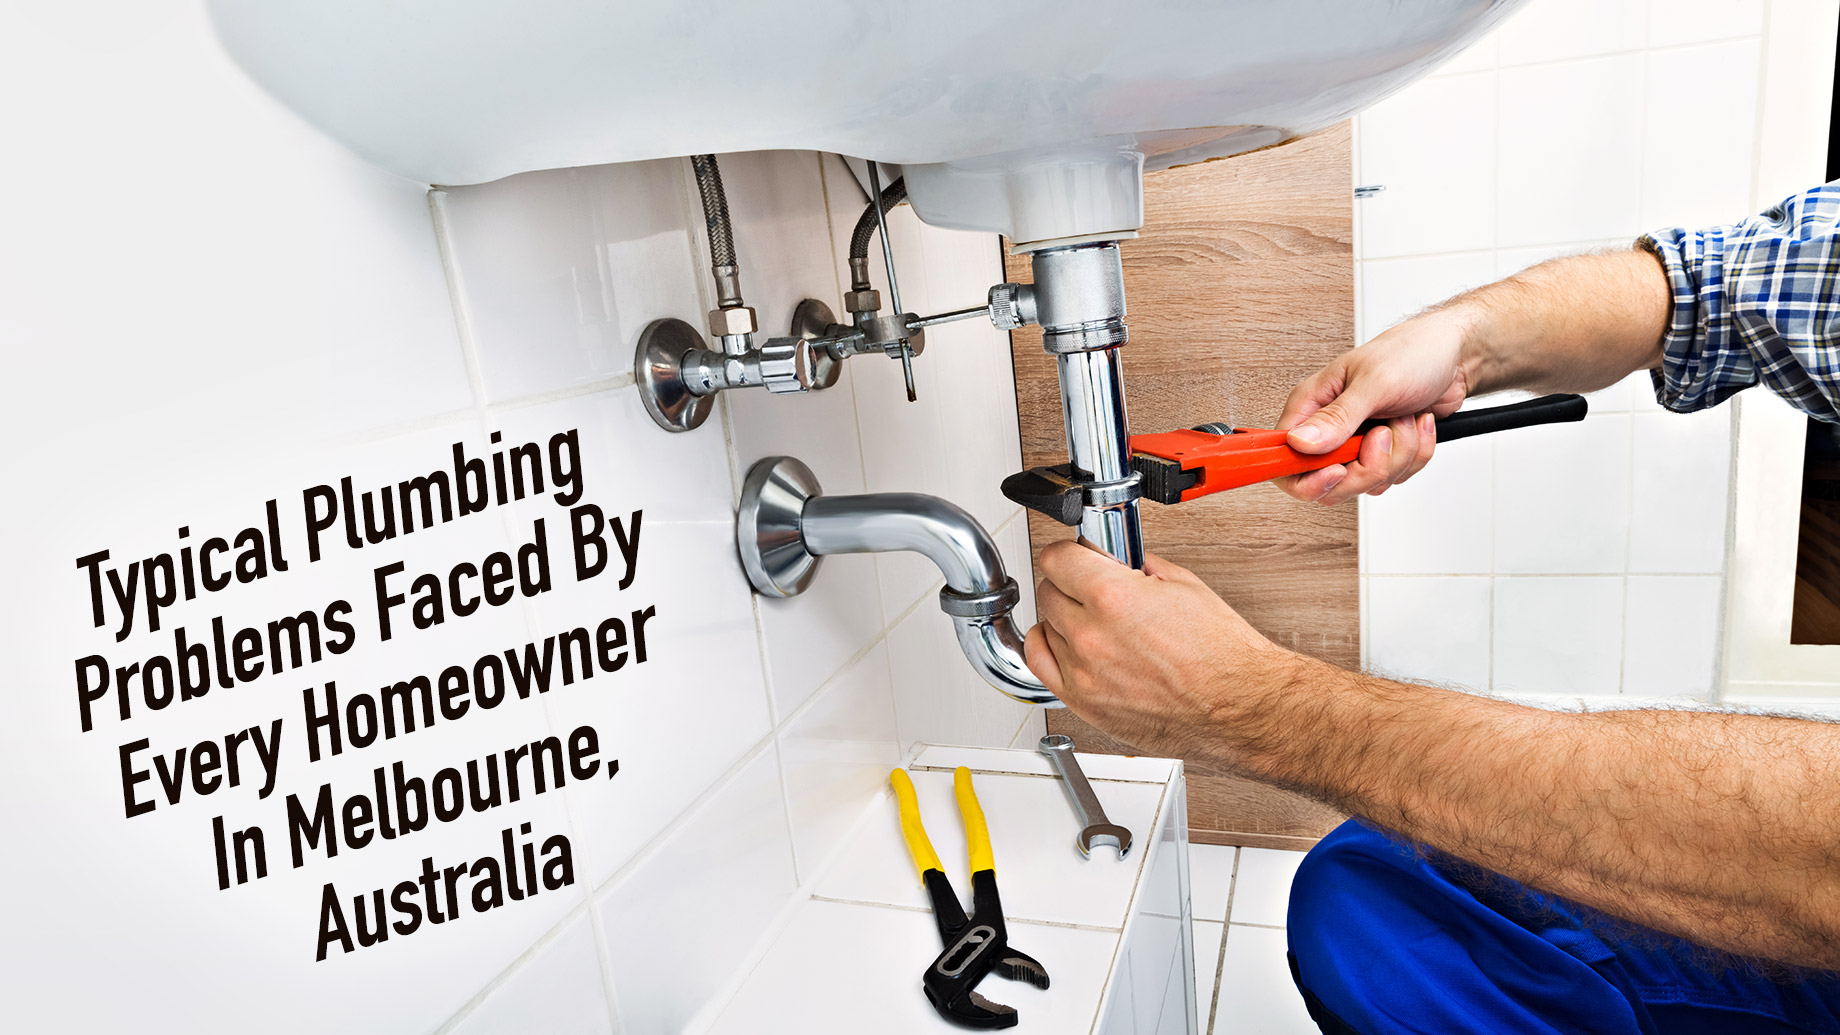 Typical Plumbing Problems Faced By Every Homeowner In Melbourne, Australia